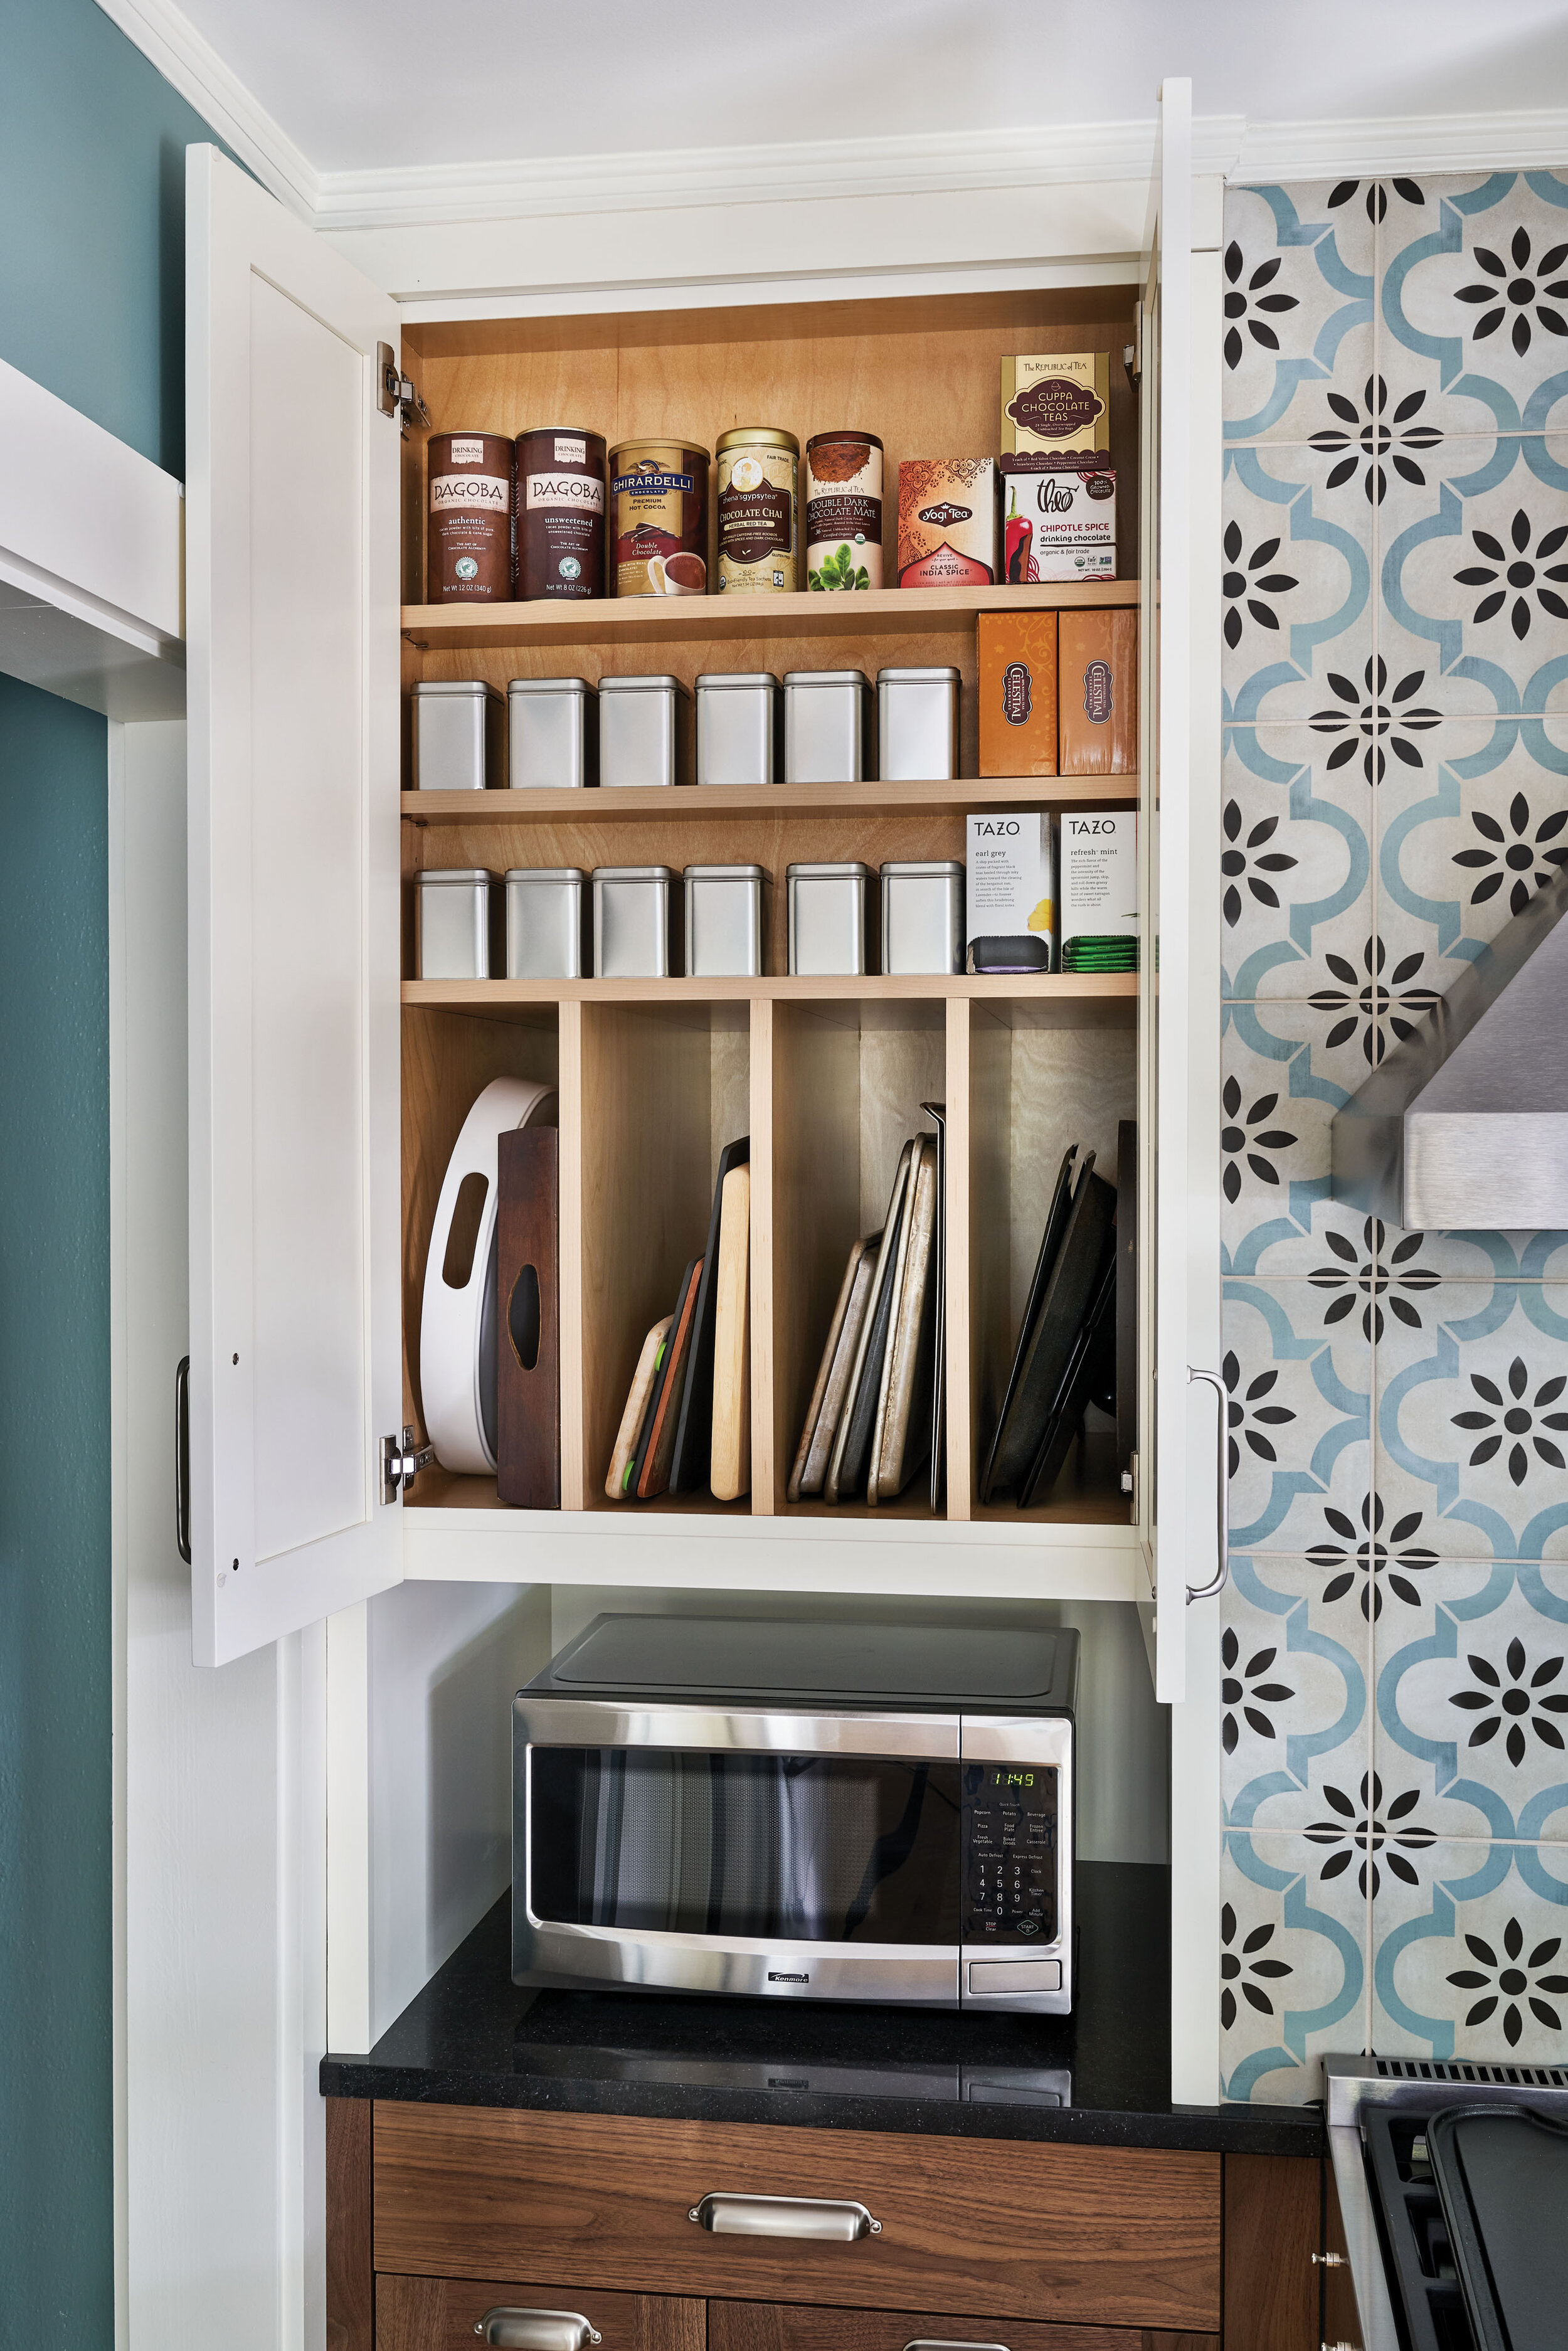 A shelf was created for the tea-loving clients to accommodate 2 different wall depths on the top and bottom.